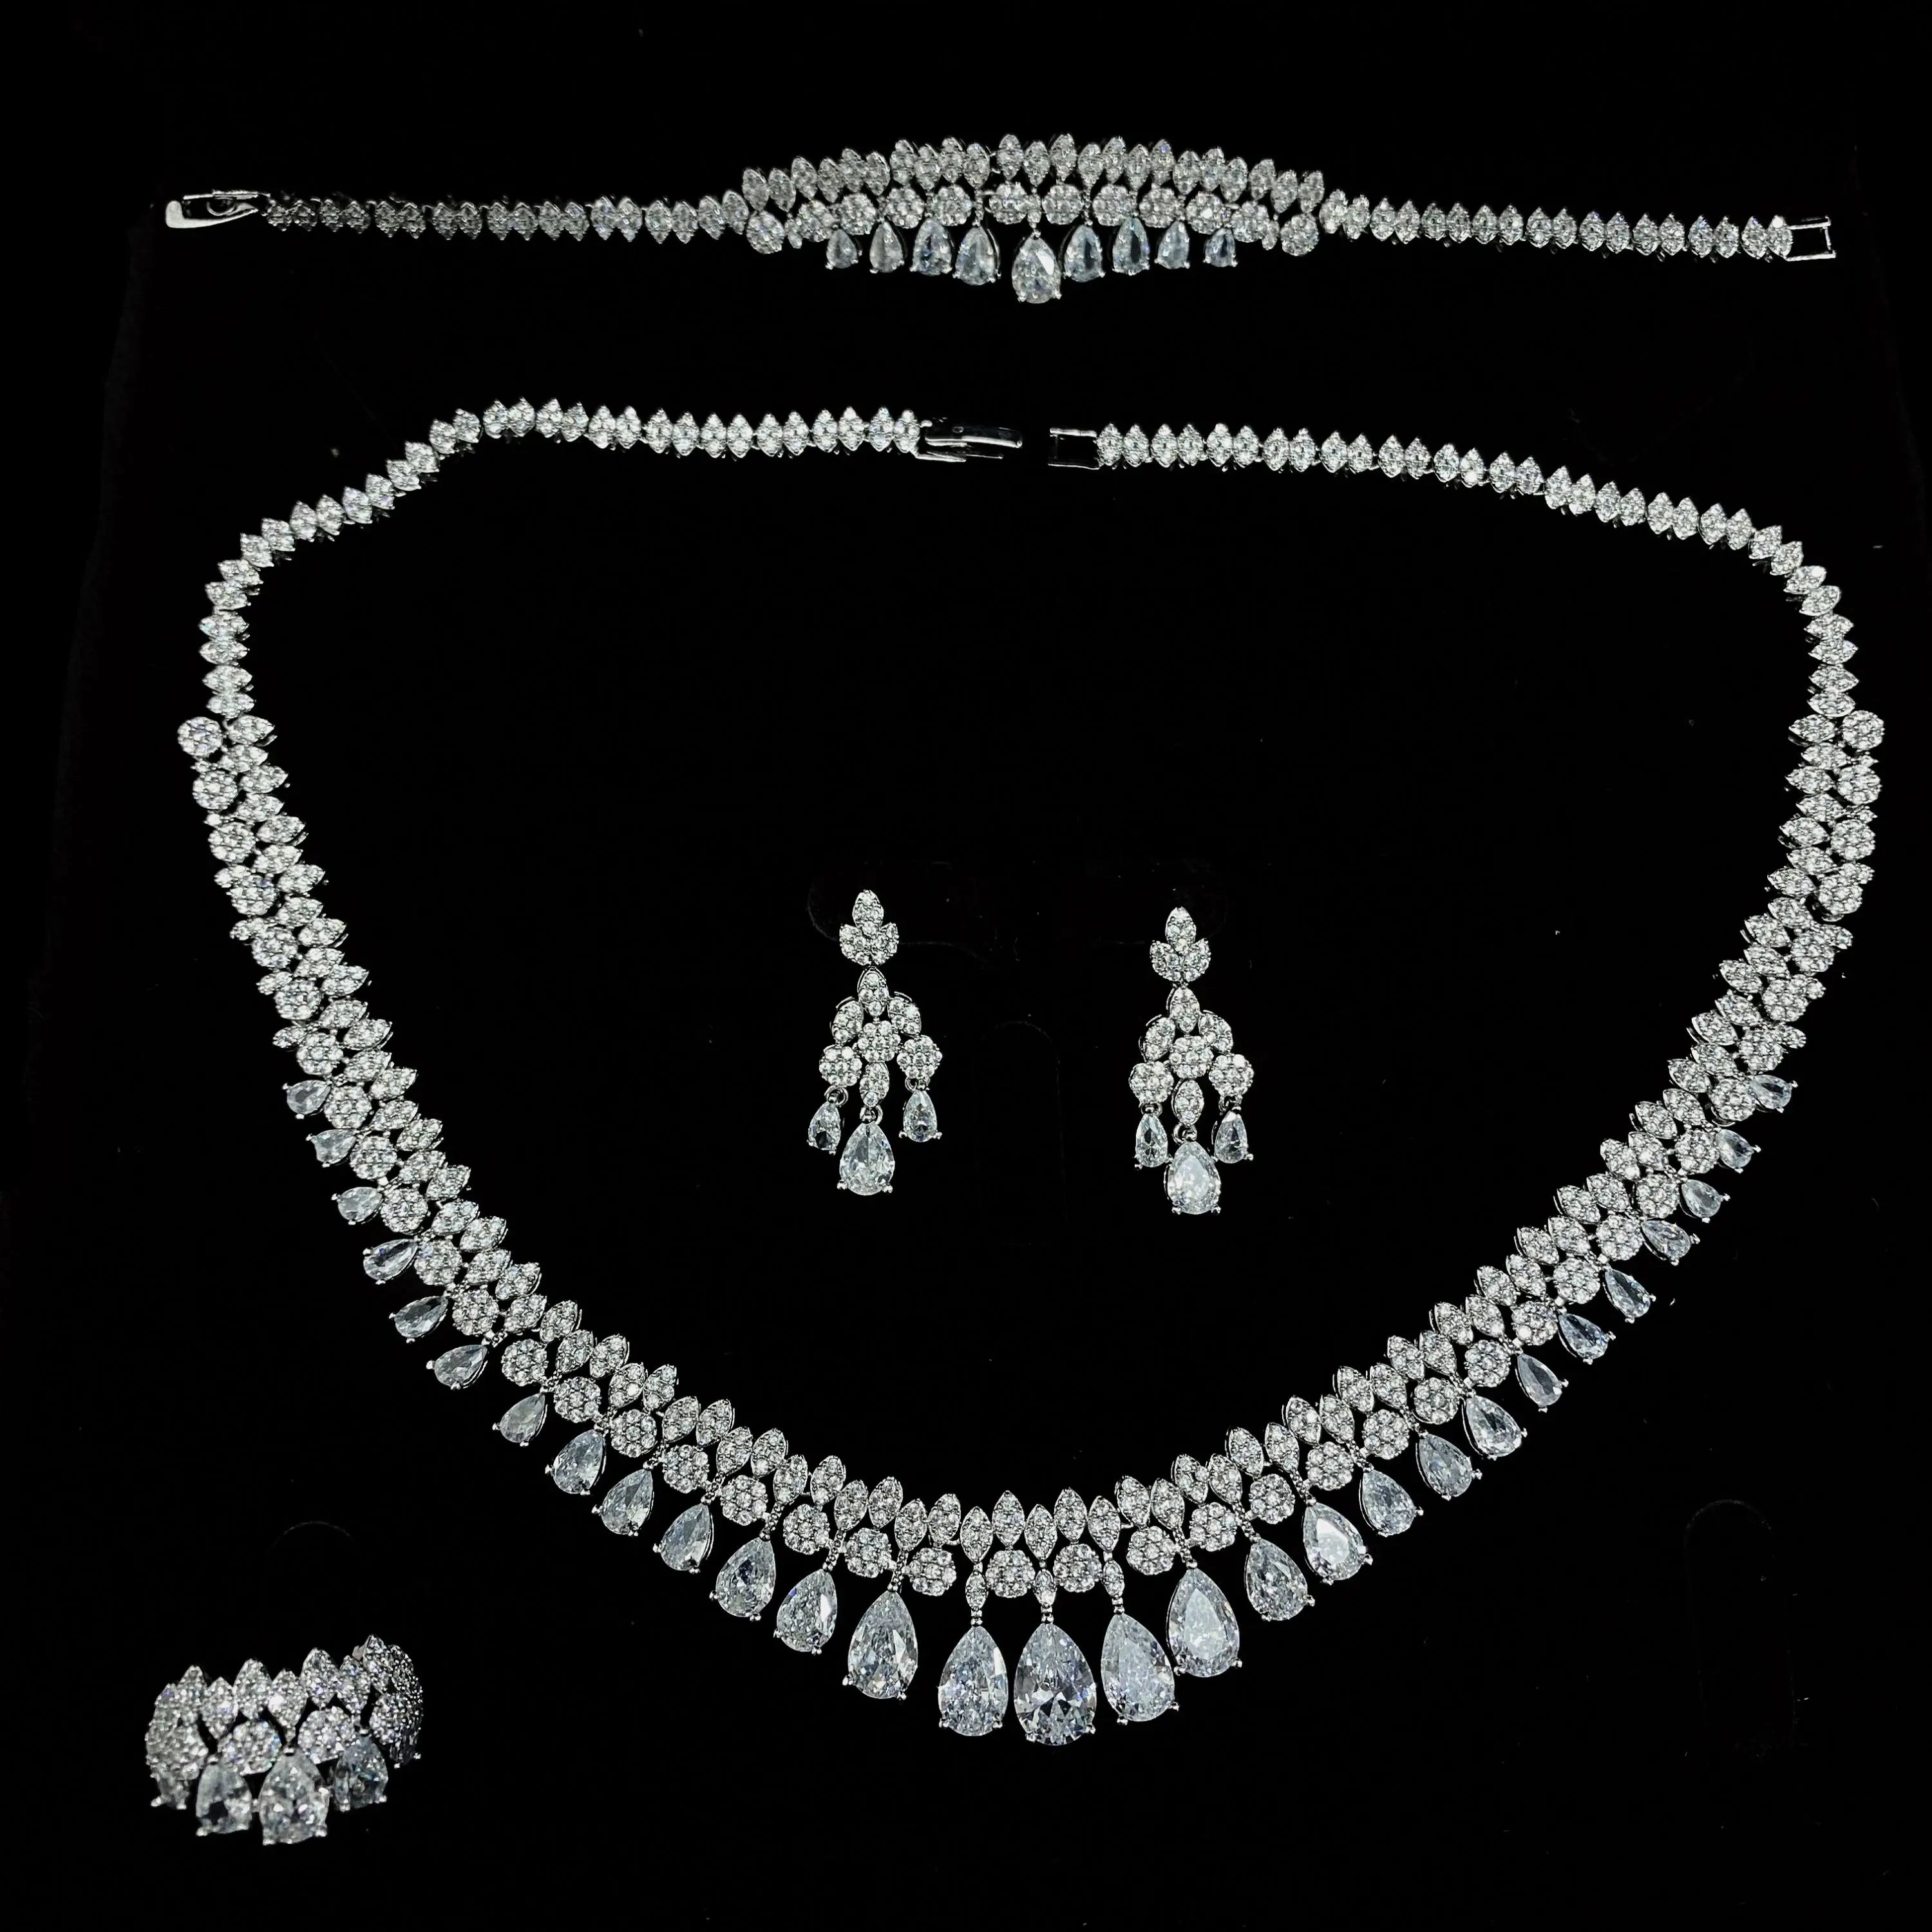 Luxury White Cubic Zirconia Bridal Jewelry Set Brides Accessories Tassel Water Drop Necklace Earring 4pcs Set for Wedding Party